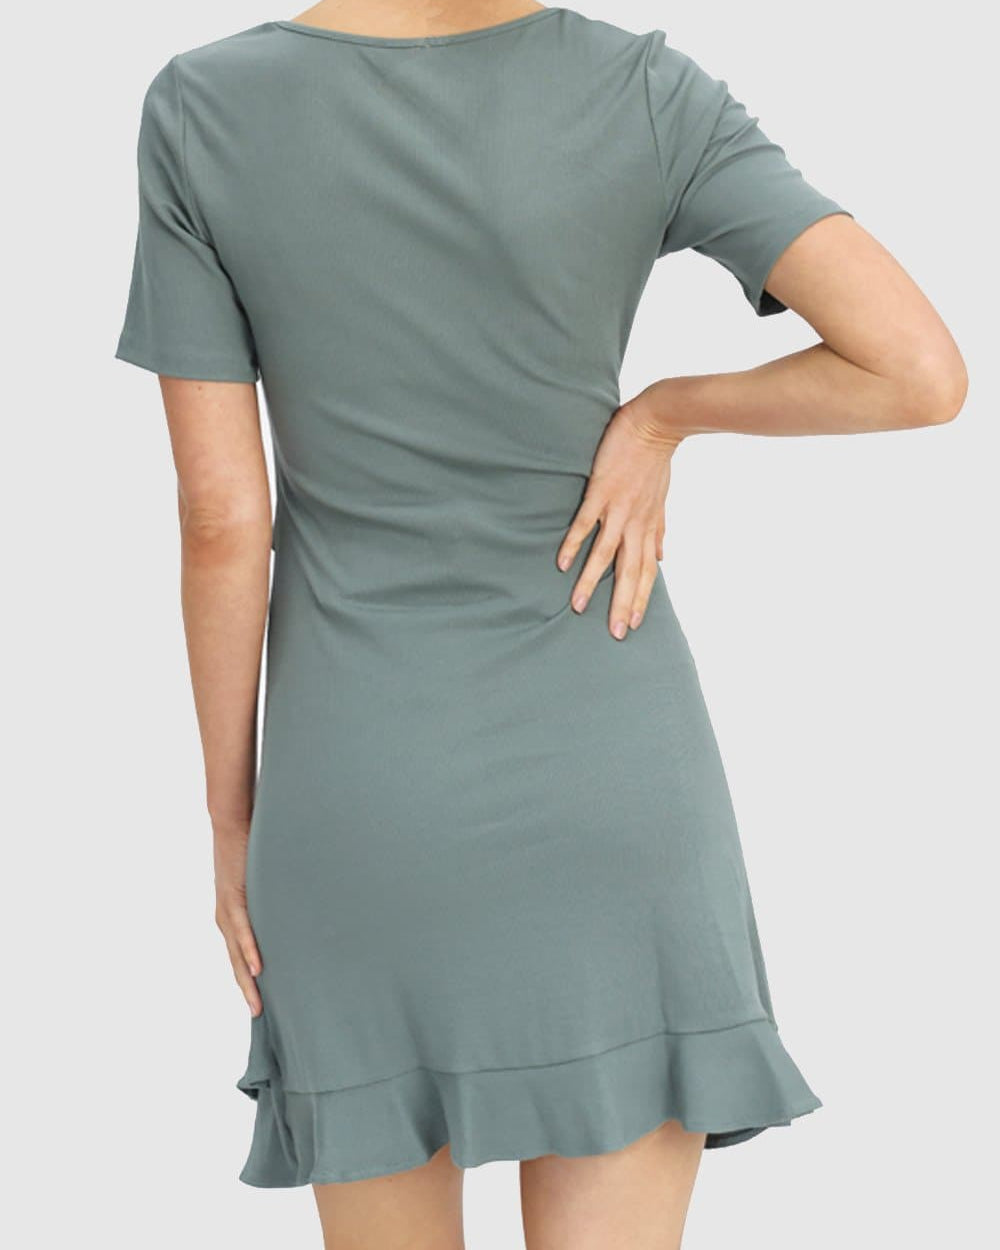 Back View - A Pregnant Woman Maternity Short Sleeve Frilled Dress in Dusty Mint